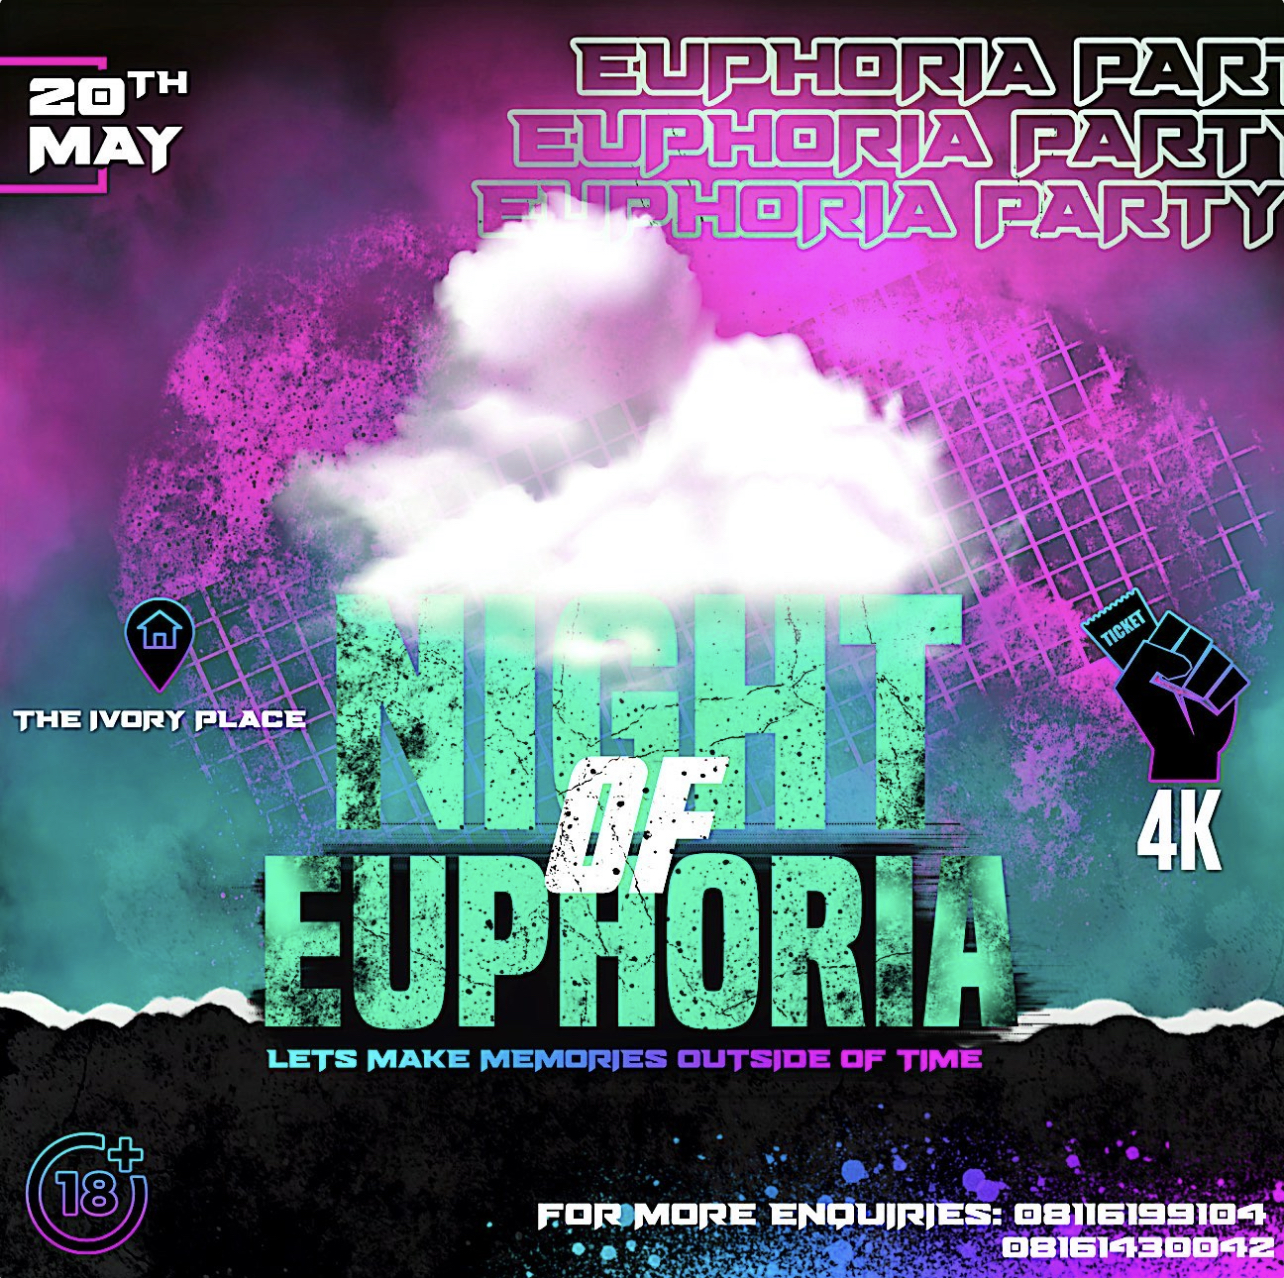 Night Of Euphoria Post free event in Nigeria using tickethub.ng, buy and sell tickets to event